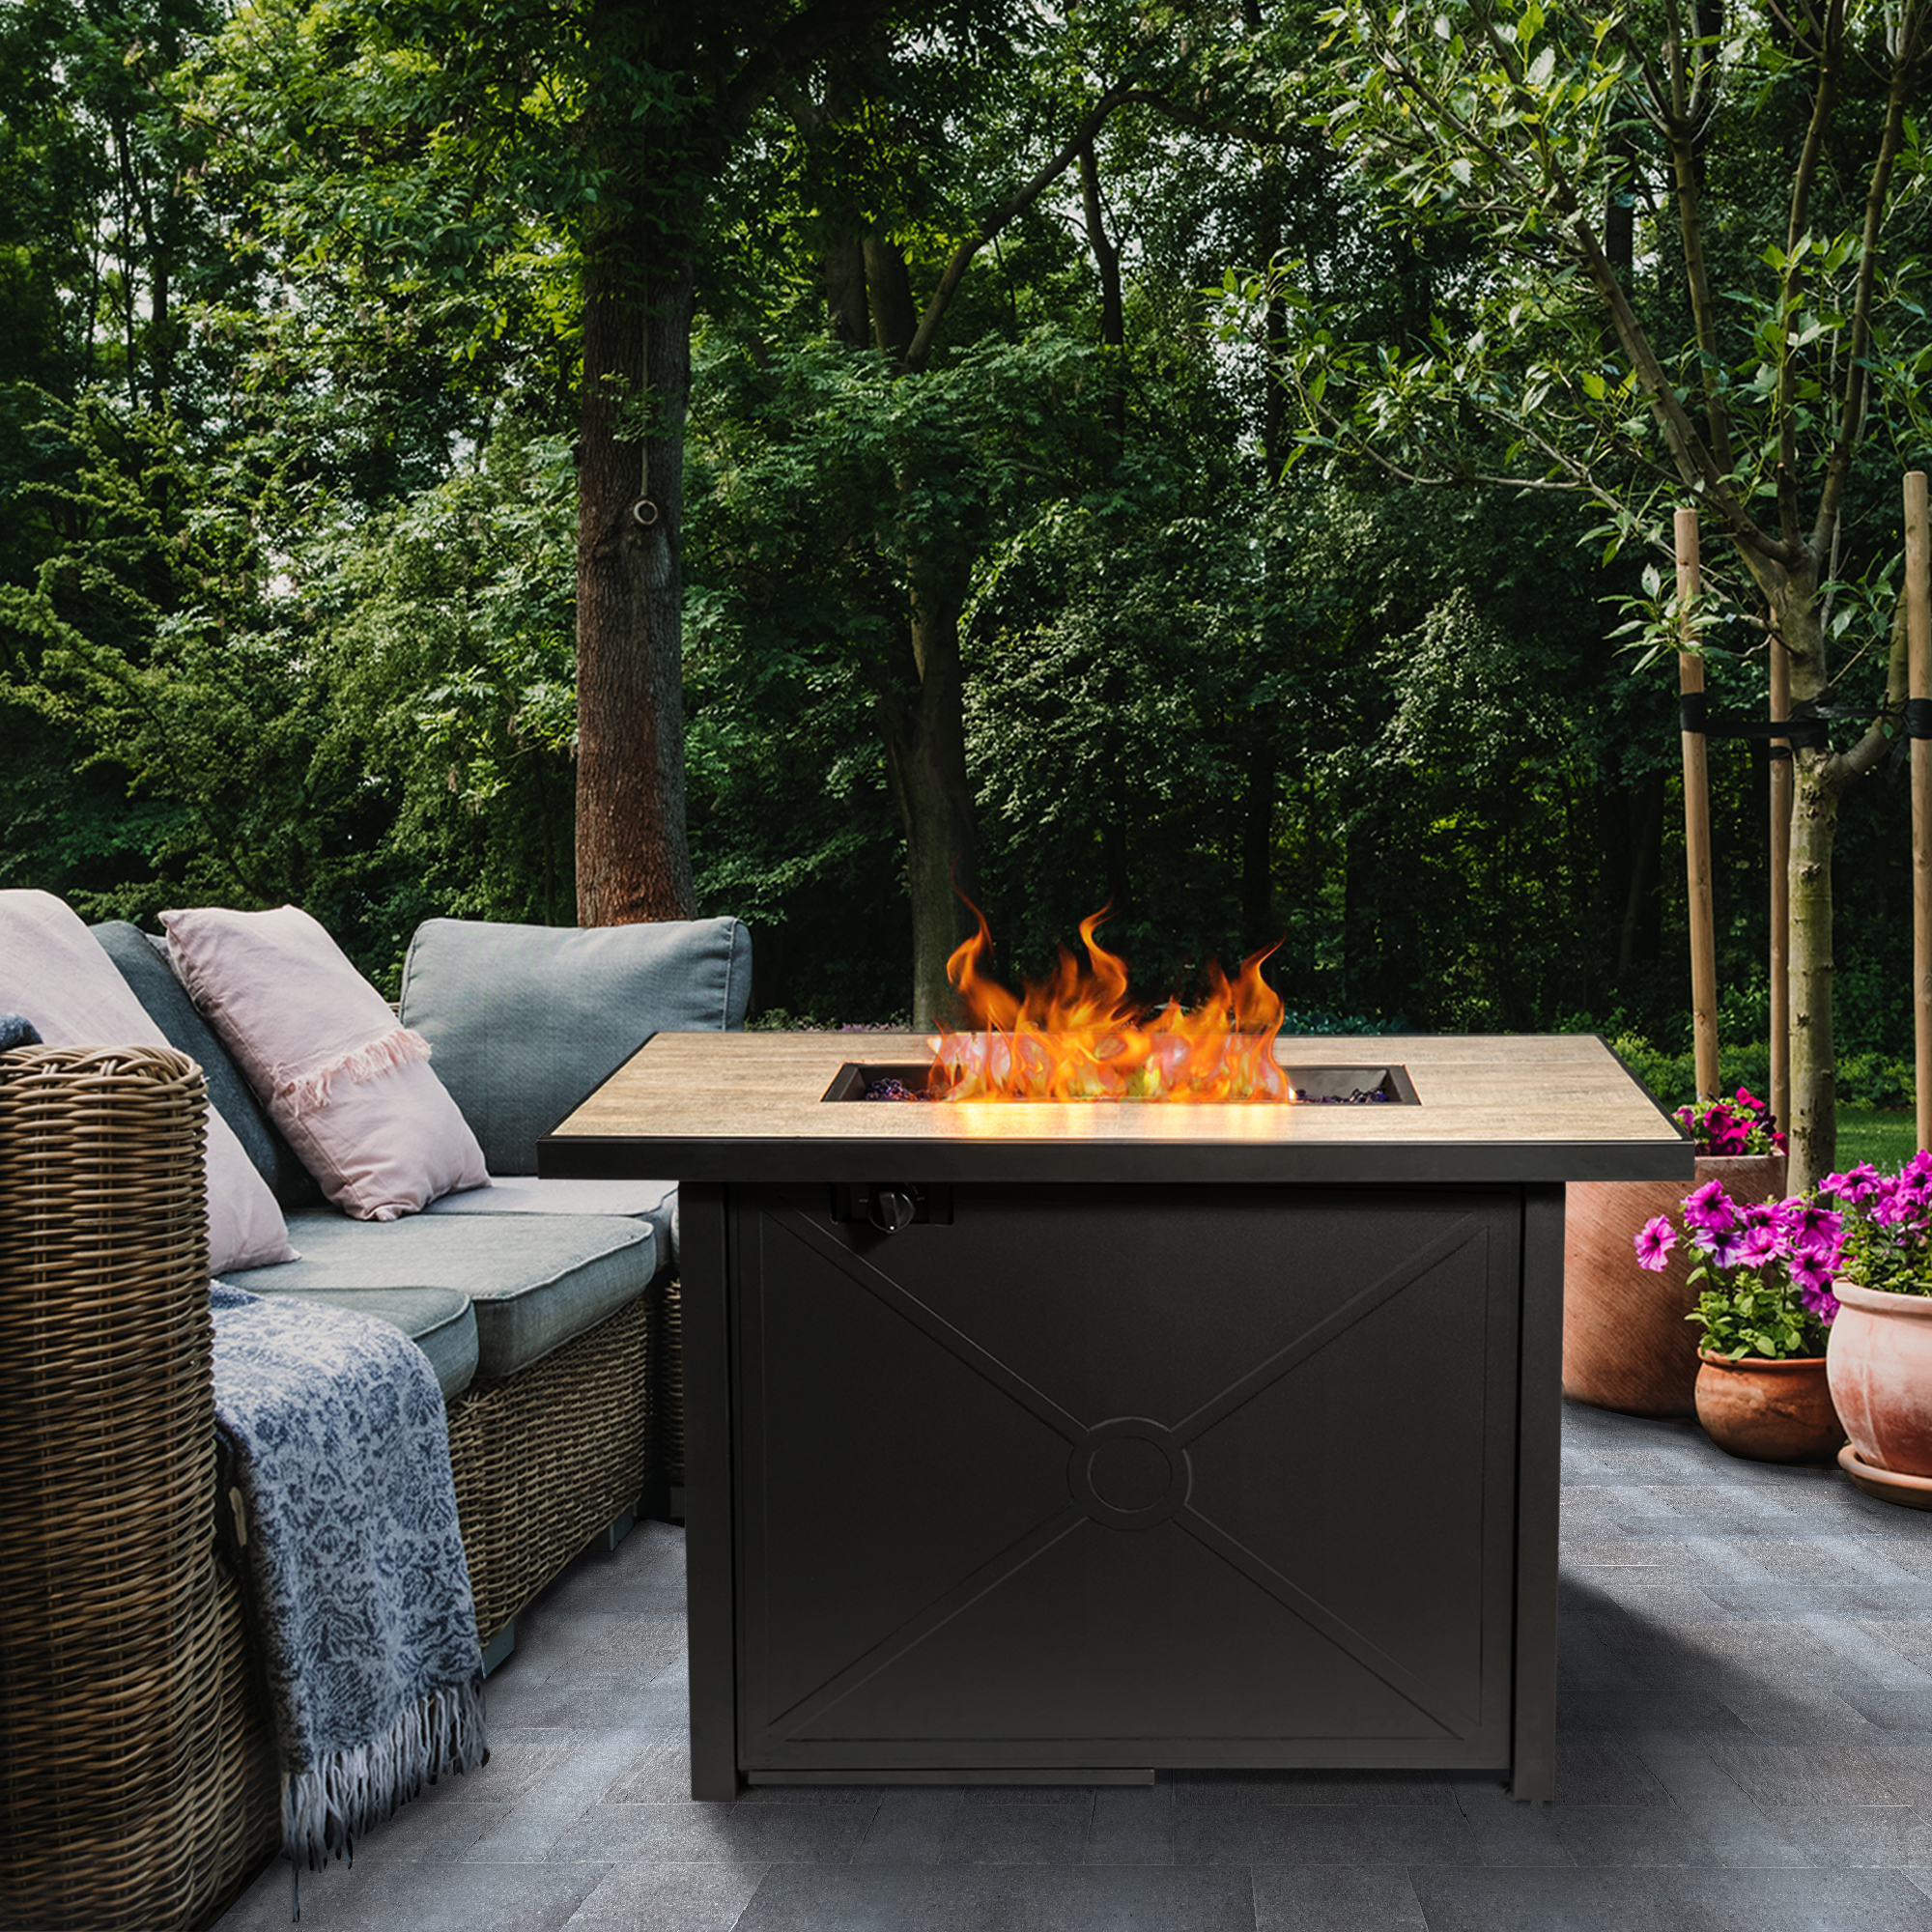 Peaktop Firepit Outdoor Gas Fire Pit, Outdoor Gas Fireplace With Glass Rocks